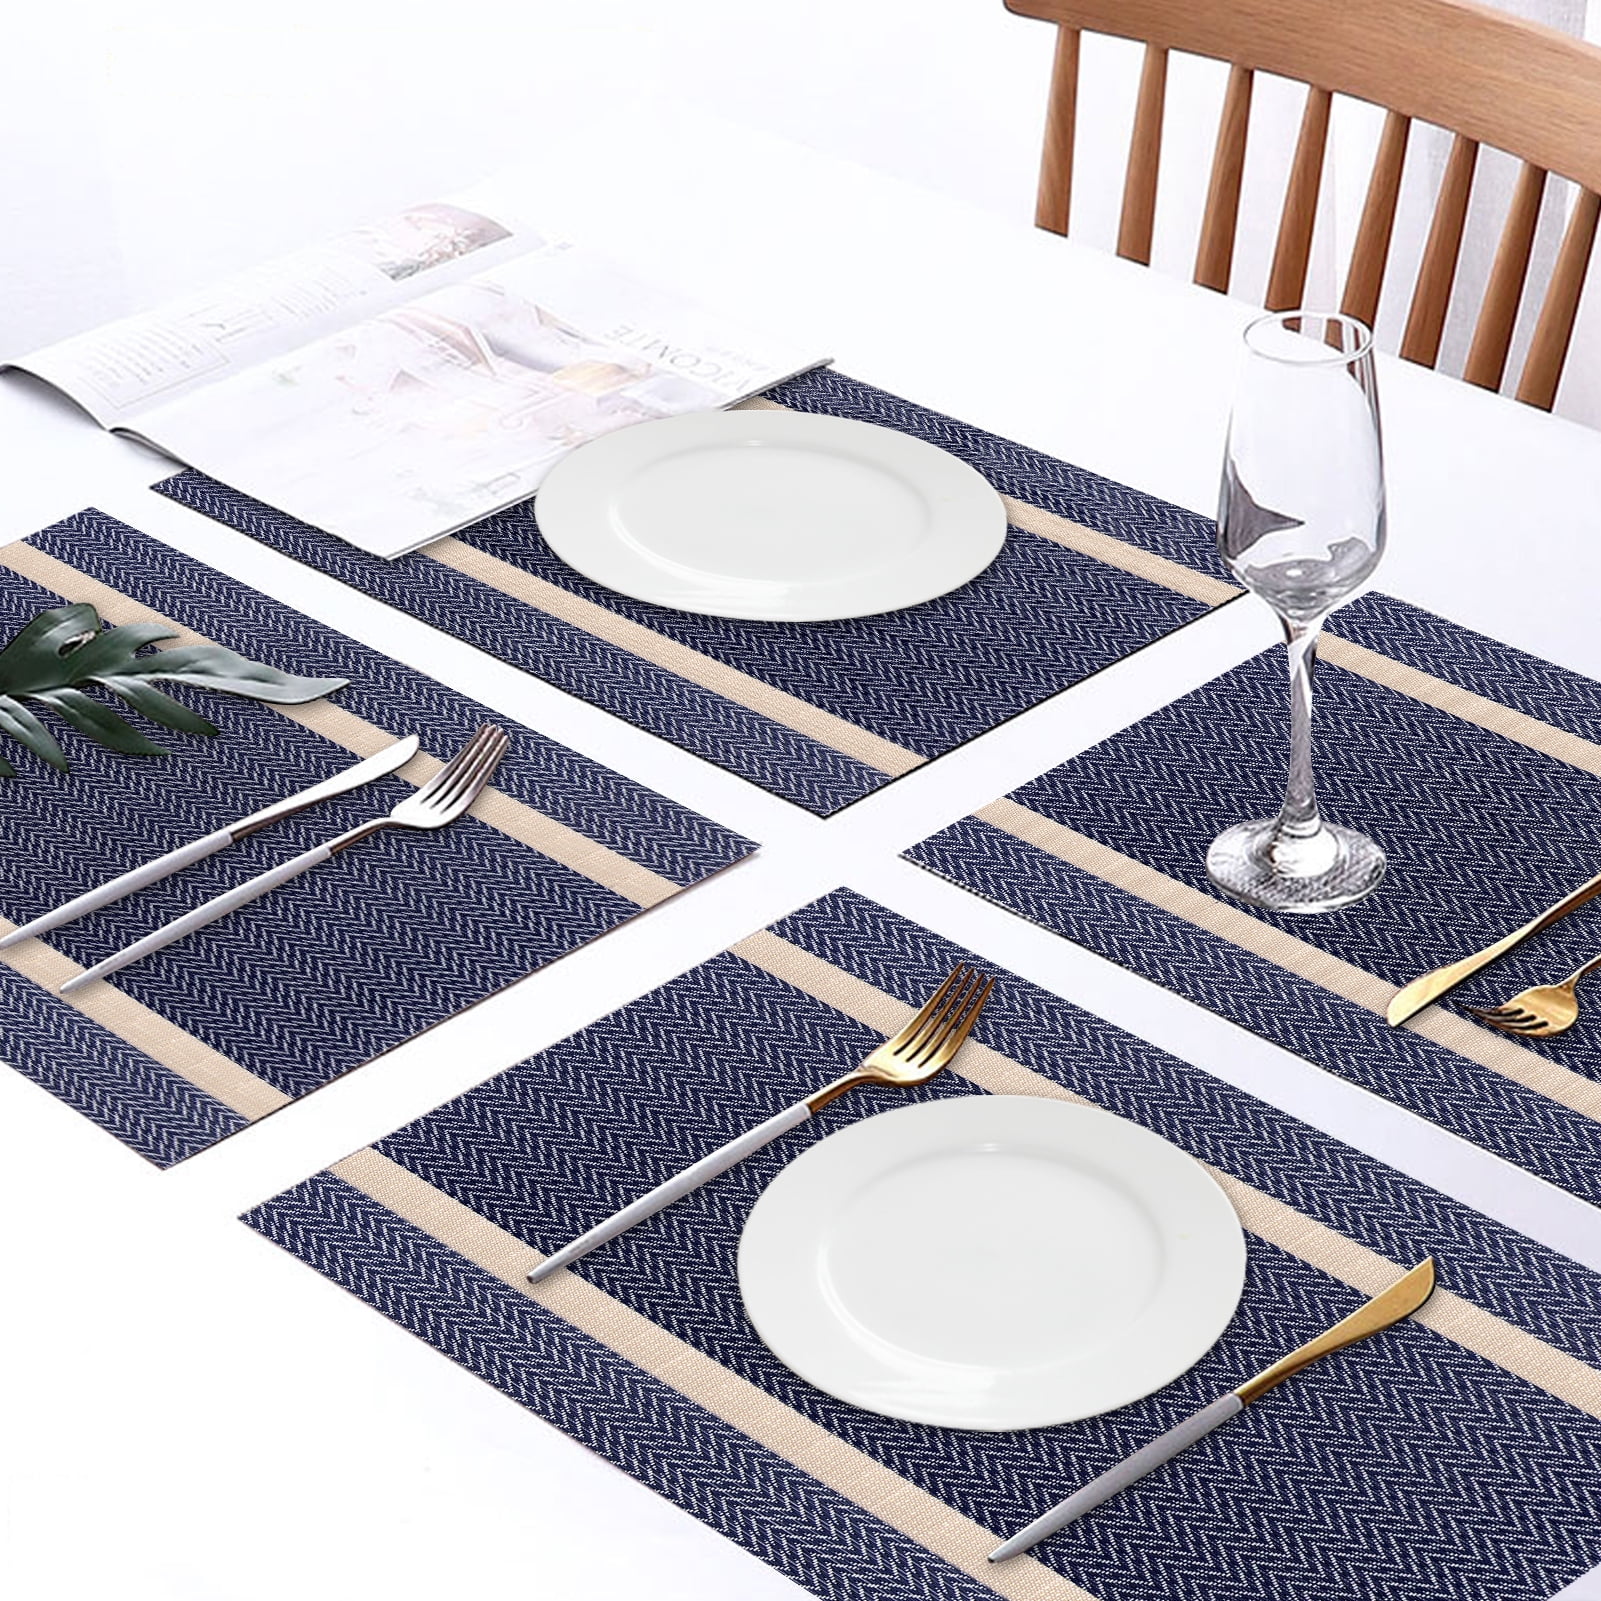 Dolcal Reversible Placemats Set of 4 Cloth Placemats Washable Dining Table  Mats Heat Resistant Place Mats for Dinner Table,Blue